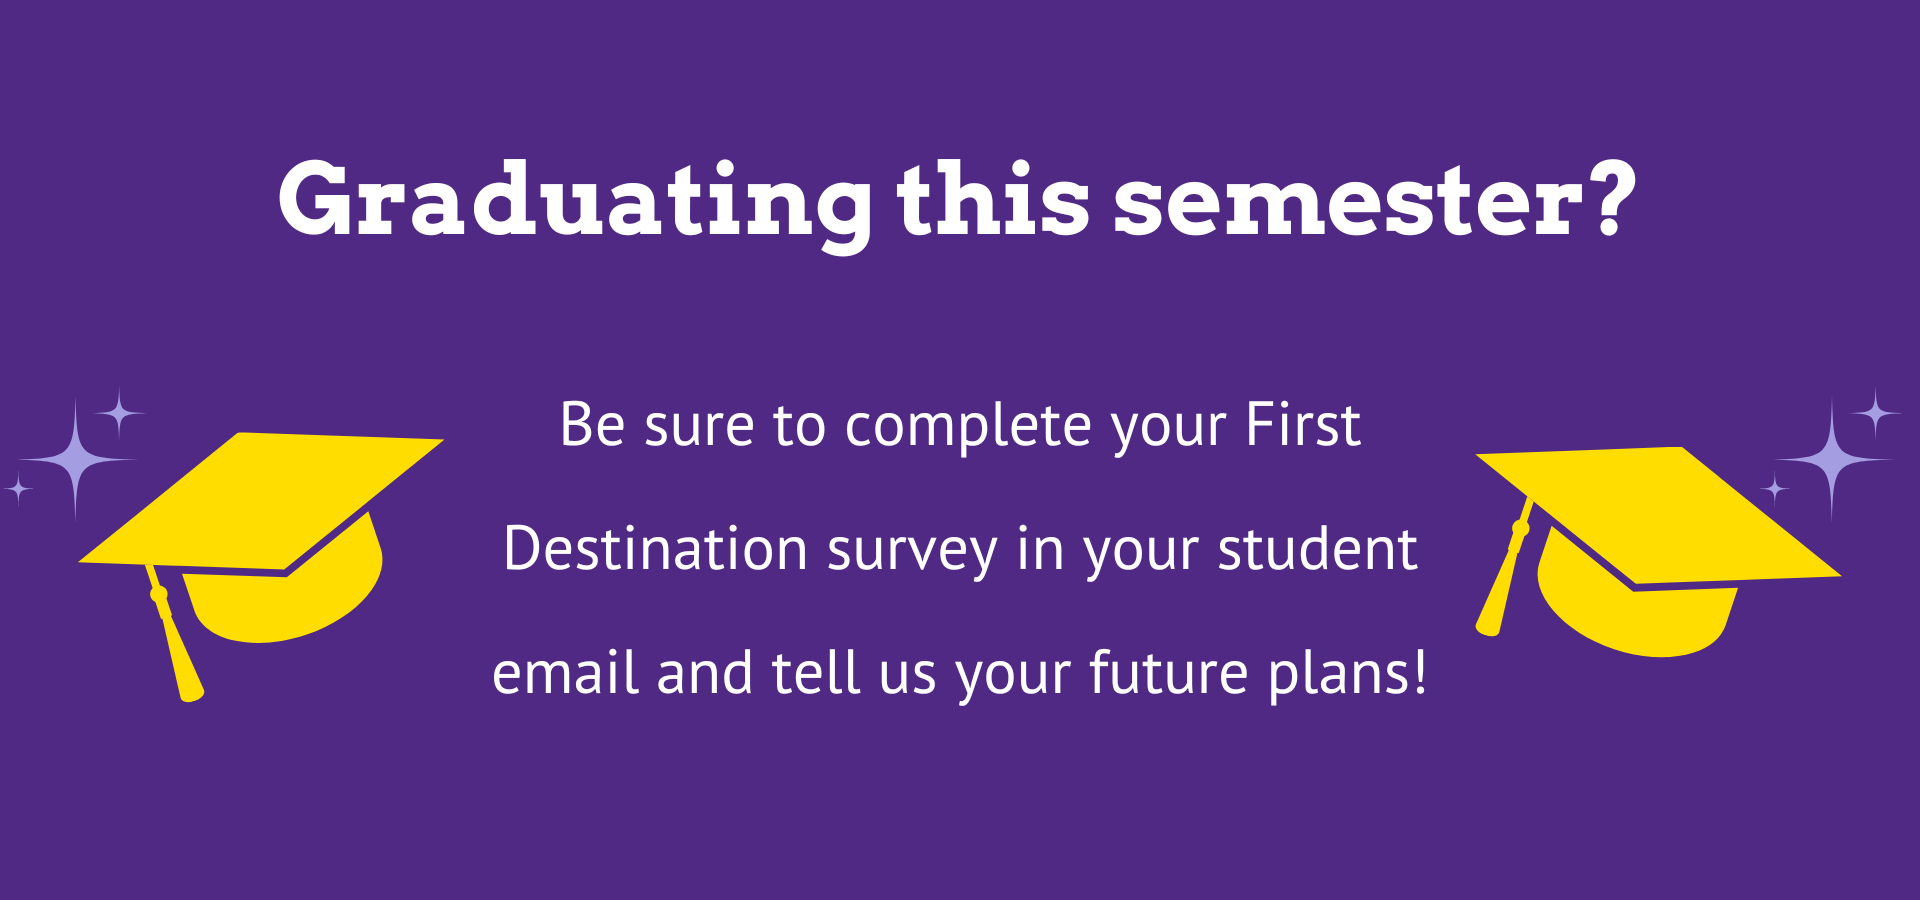 Be sure to complete your first destination survey in your student email and tell us your future plans!